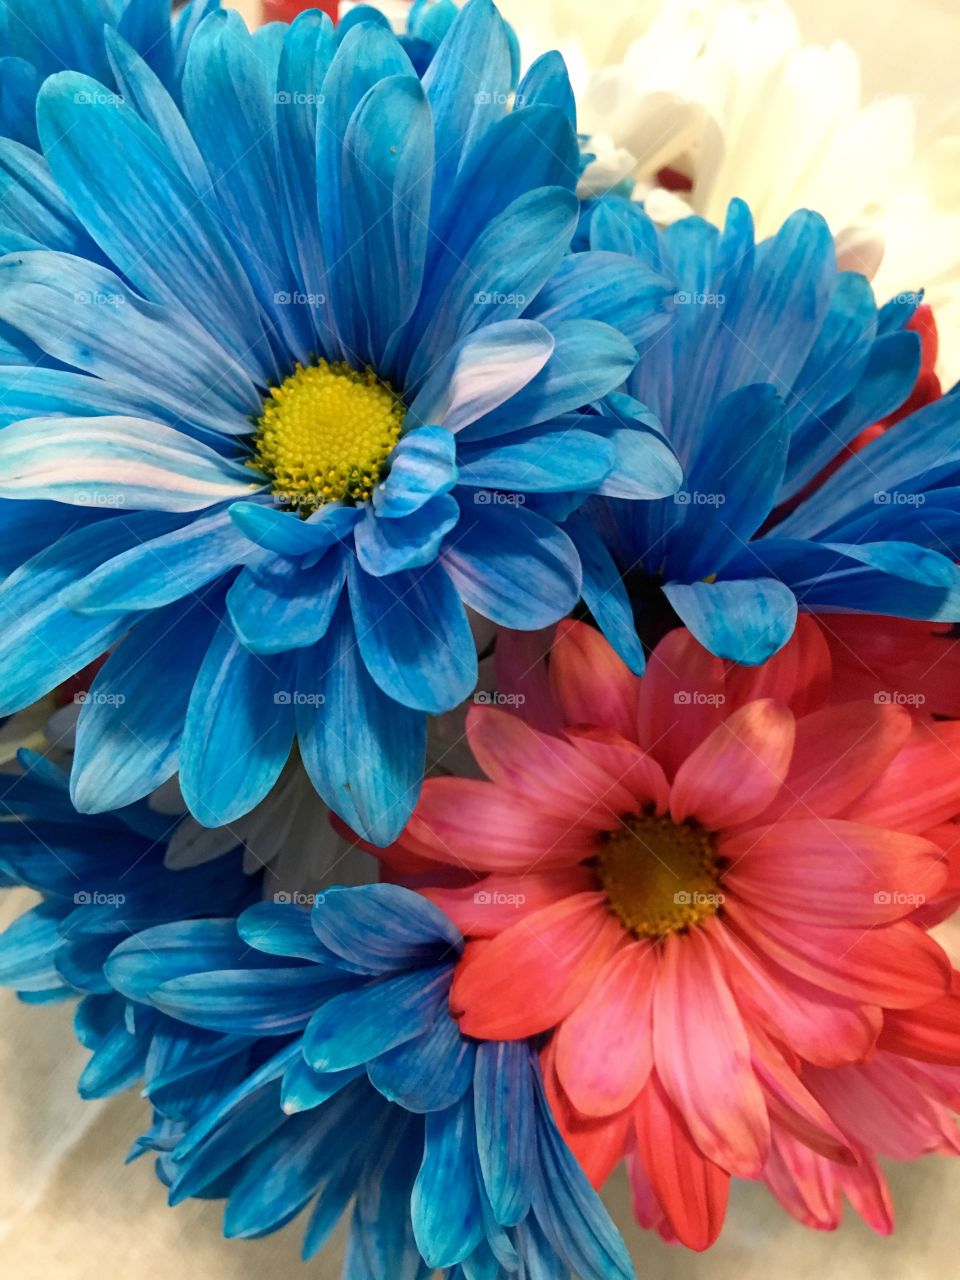 Red, White and Blue Daisies 